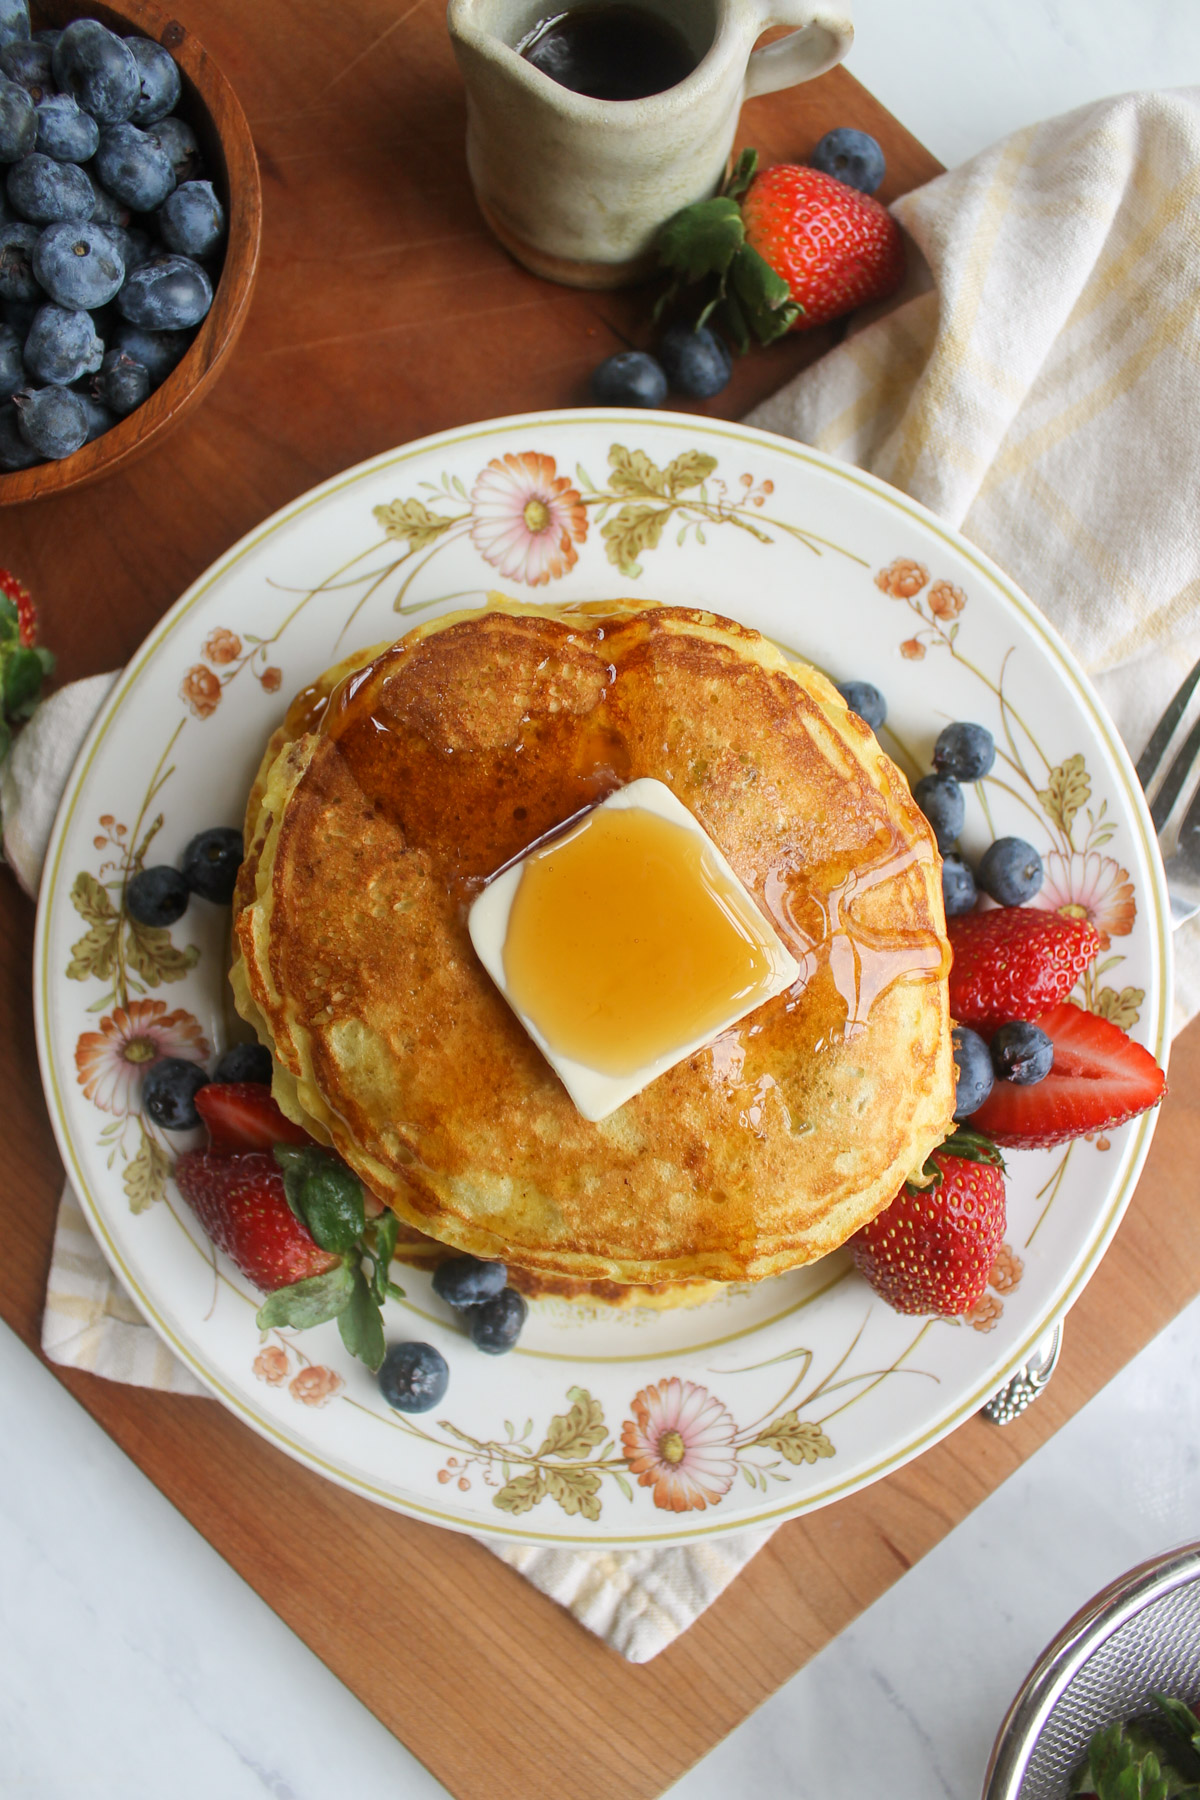 Pancakes on a flowered plate with butter, syrup and berries.